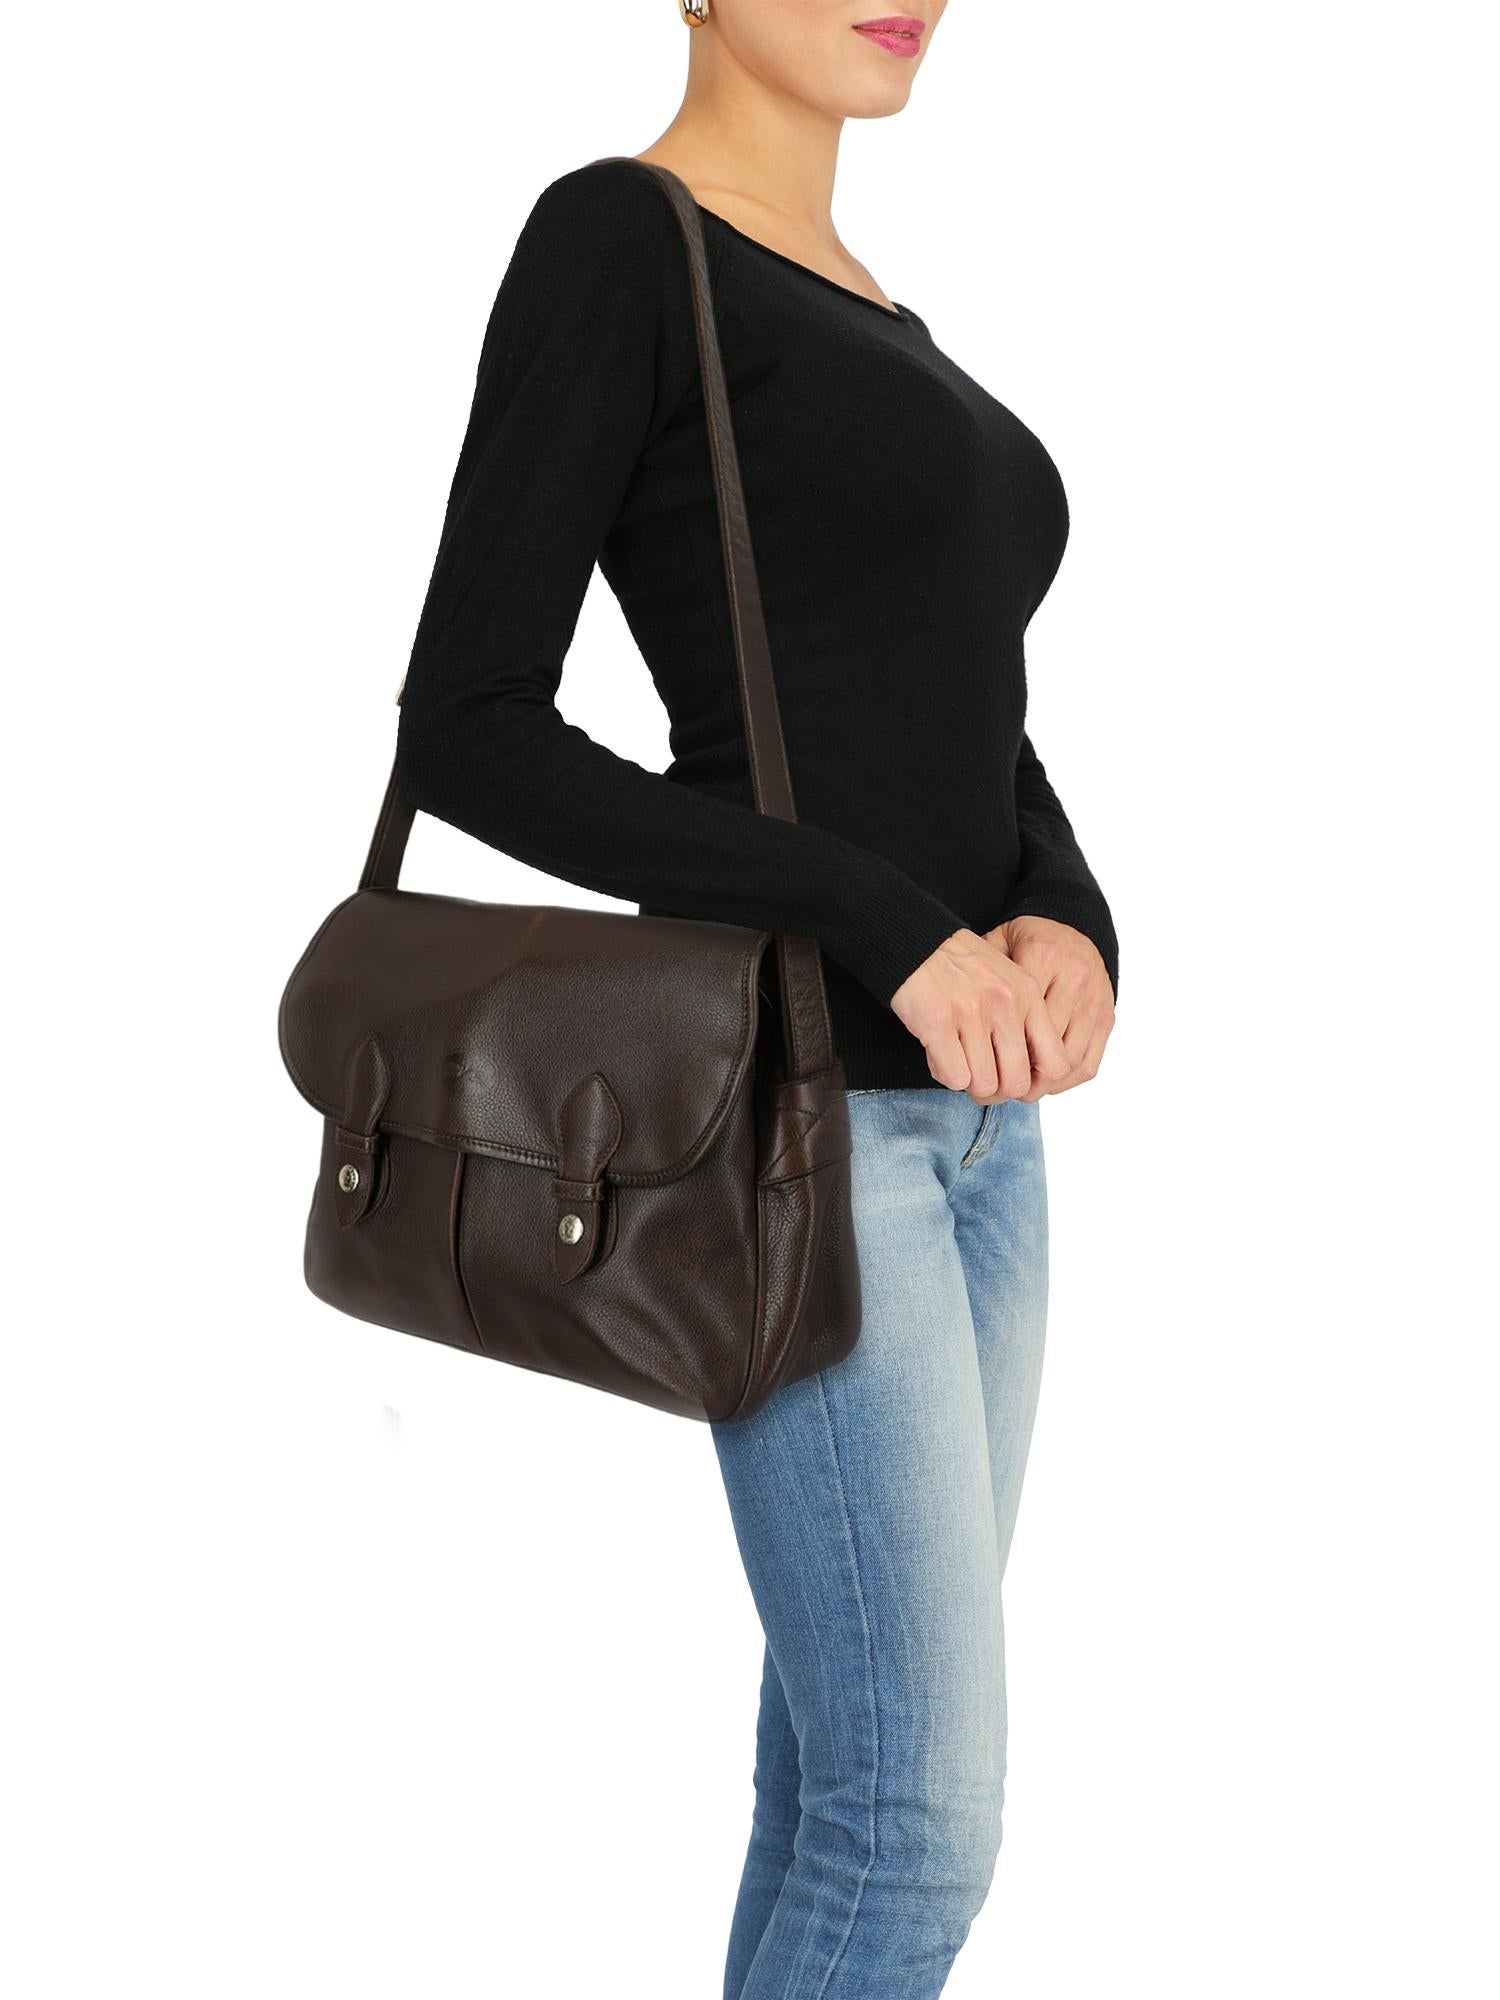 Bag, leather, solid color, front logo, zipper fastening, gold-tone hardware, internal zipped pocket, internal pockets, day bag

Includes:
- Dust bag

Product Condition: Very Good
Lining: negligible residues. Hardware: visible scuffing. Corners and